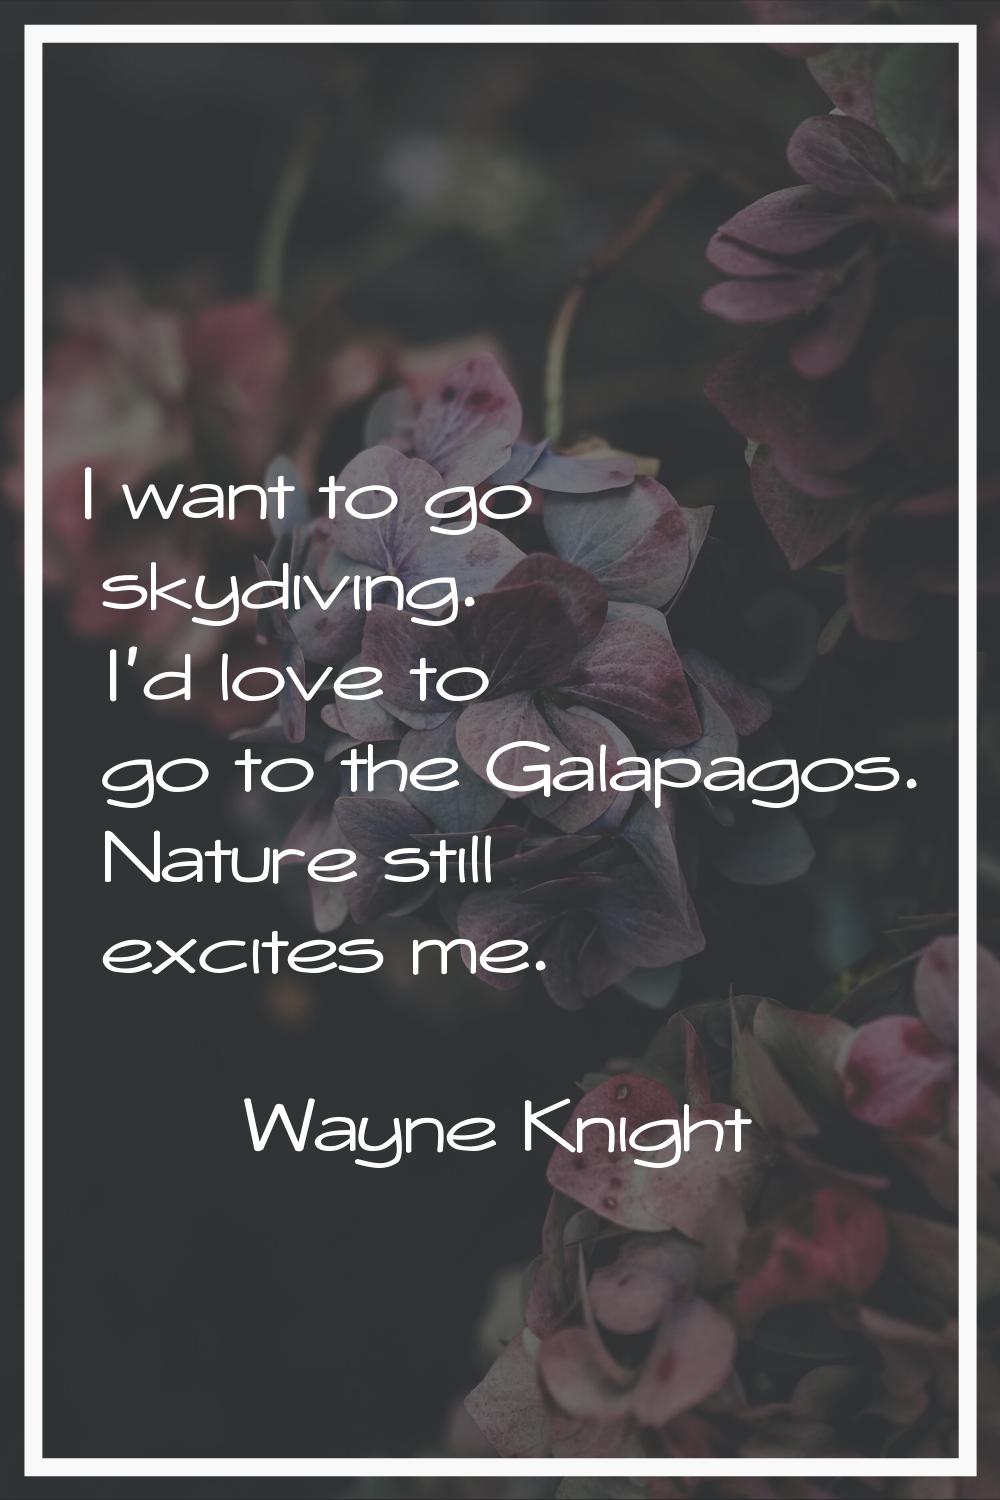 I want to go skydiving. I'd love to go to the Galapagos. Nature still excites me.